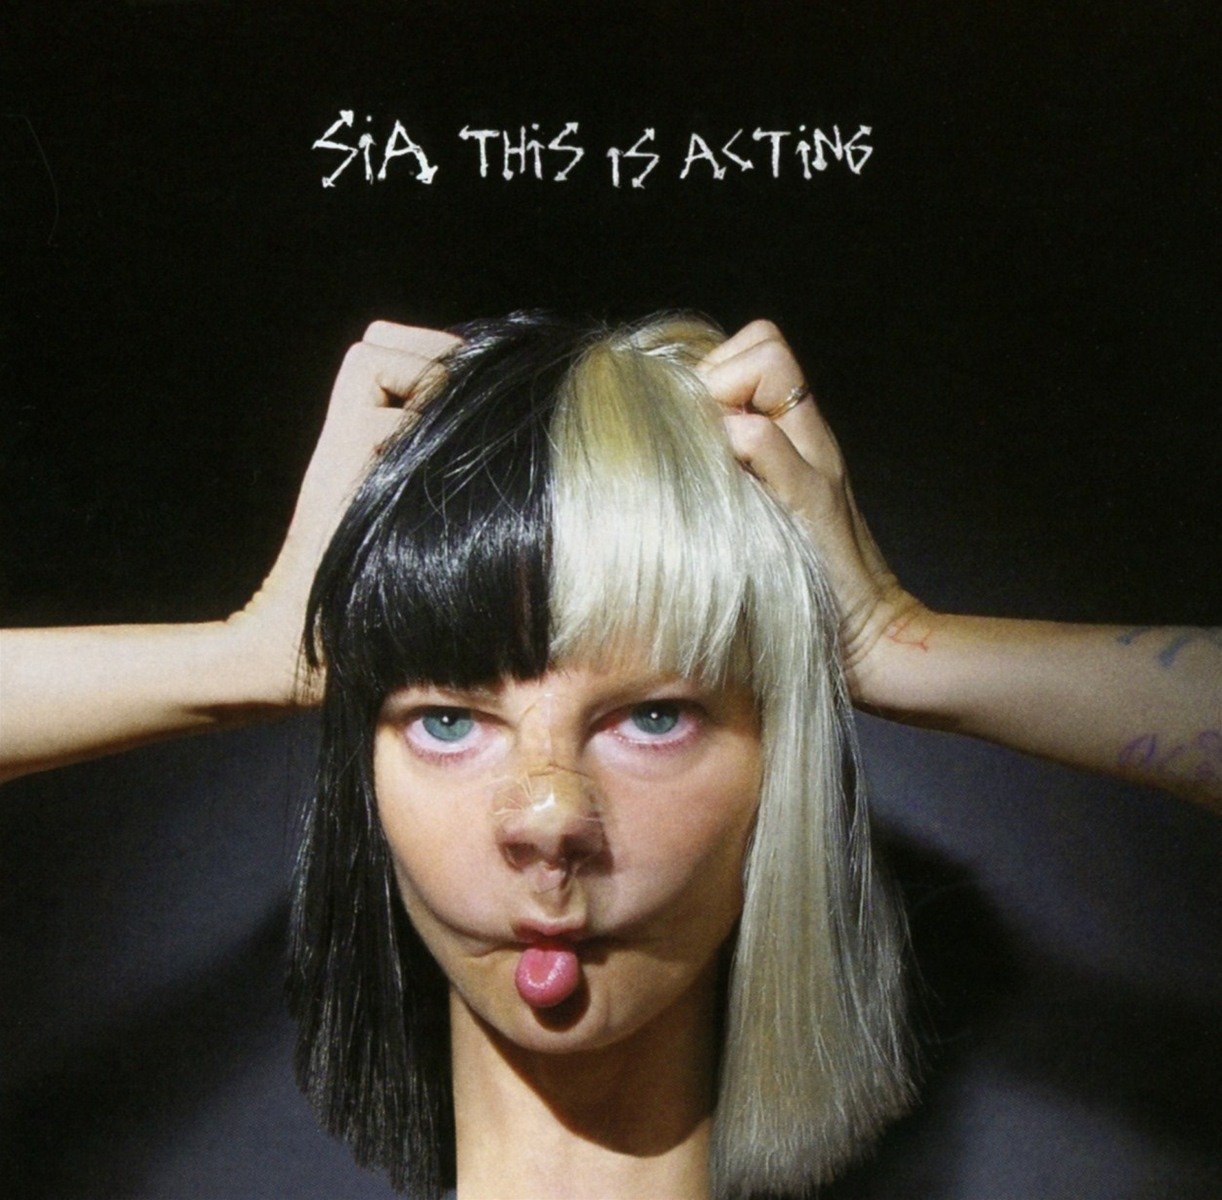 Sia - This Is Acting (2016) [FLAC 24bit/96kHz]